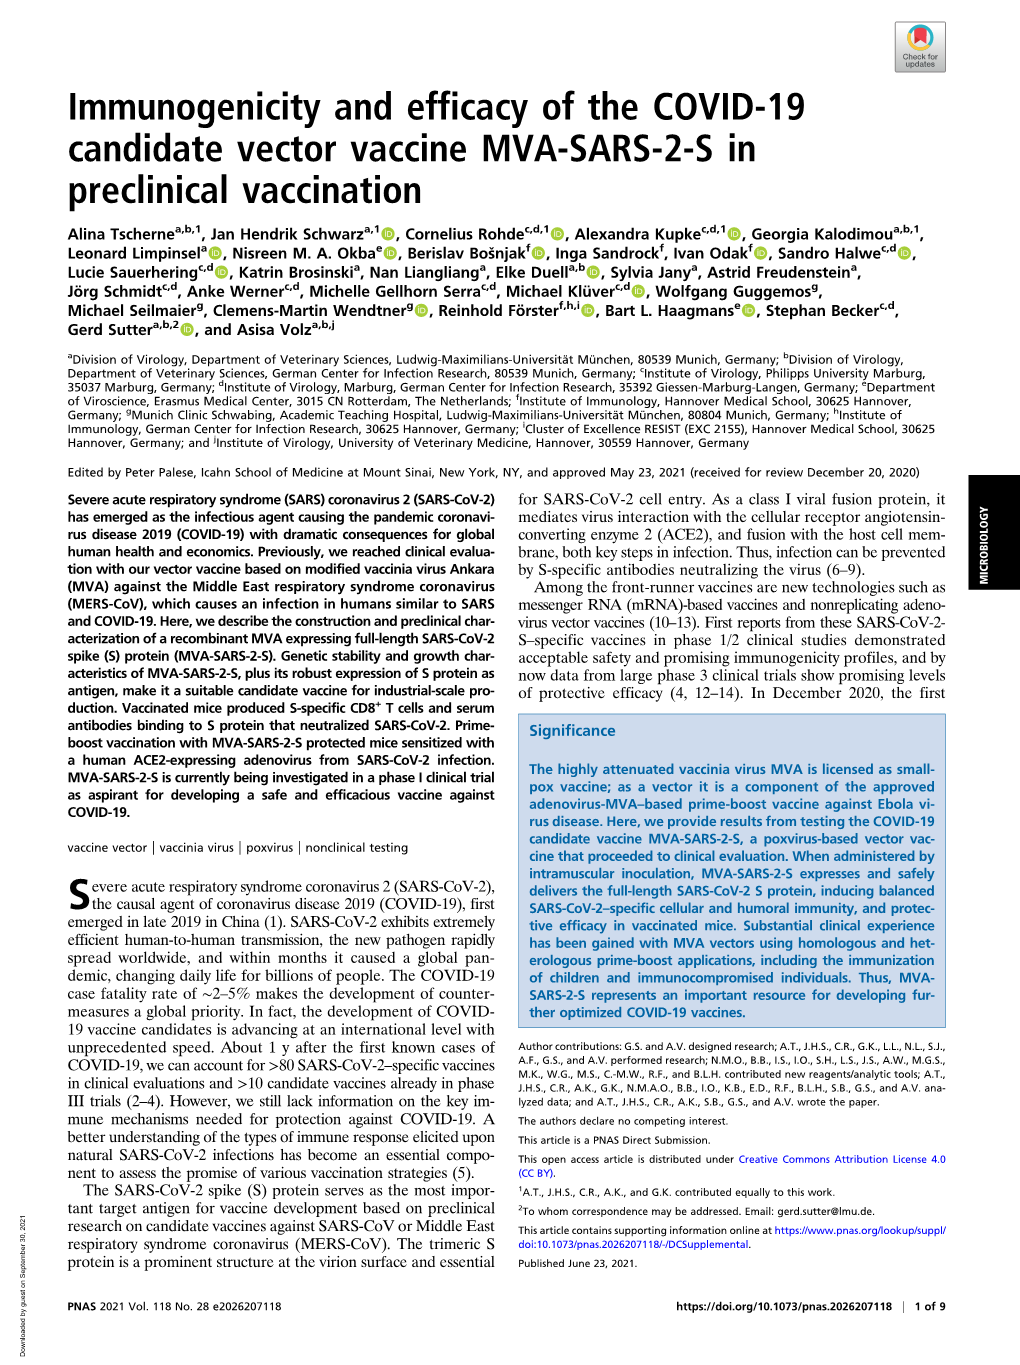 Immunogenicity and Efficacy of the COVID-19 Candidate Vector Vaccine MVA-SARS-2-S in Preclinical Vaccination